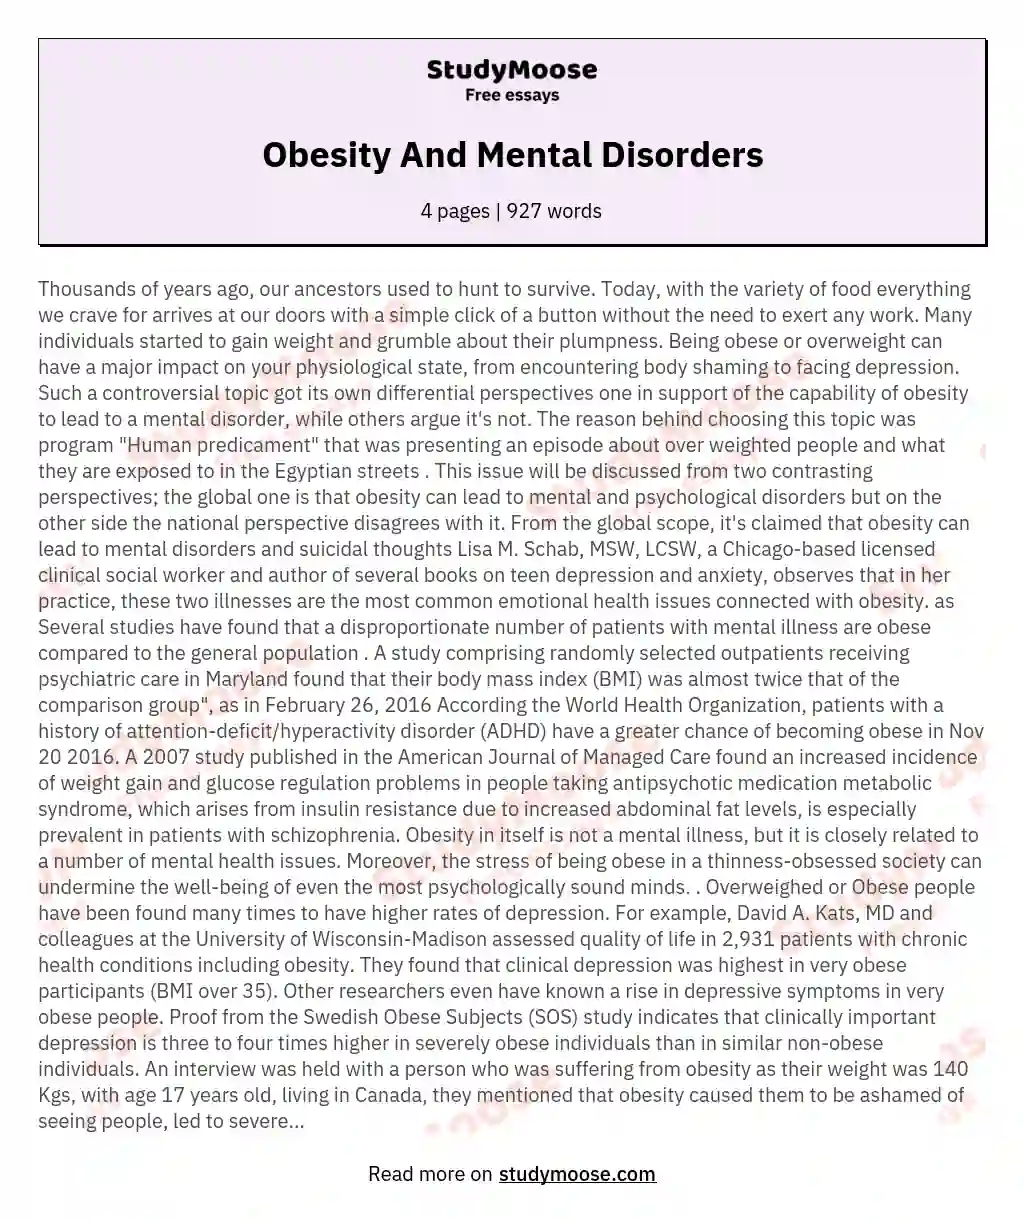 Obesity And Mental Disorders essay